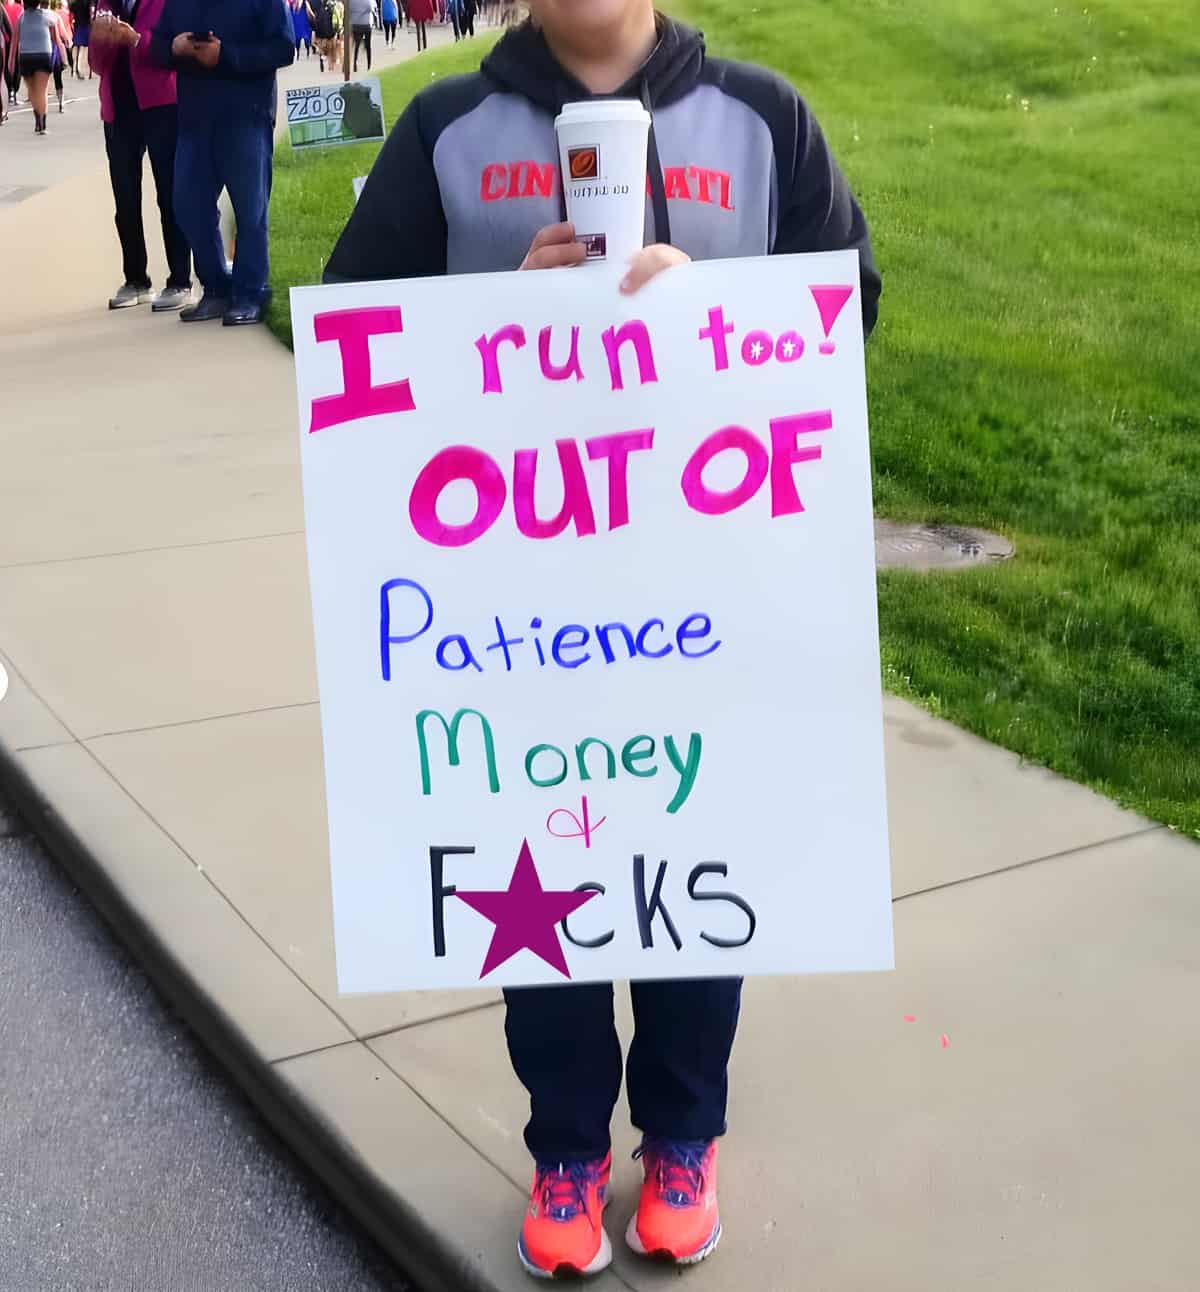 A person holding a funny sign at a race that says 